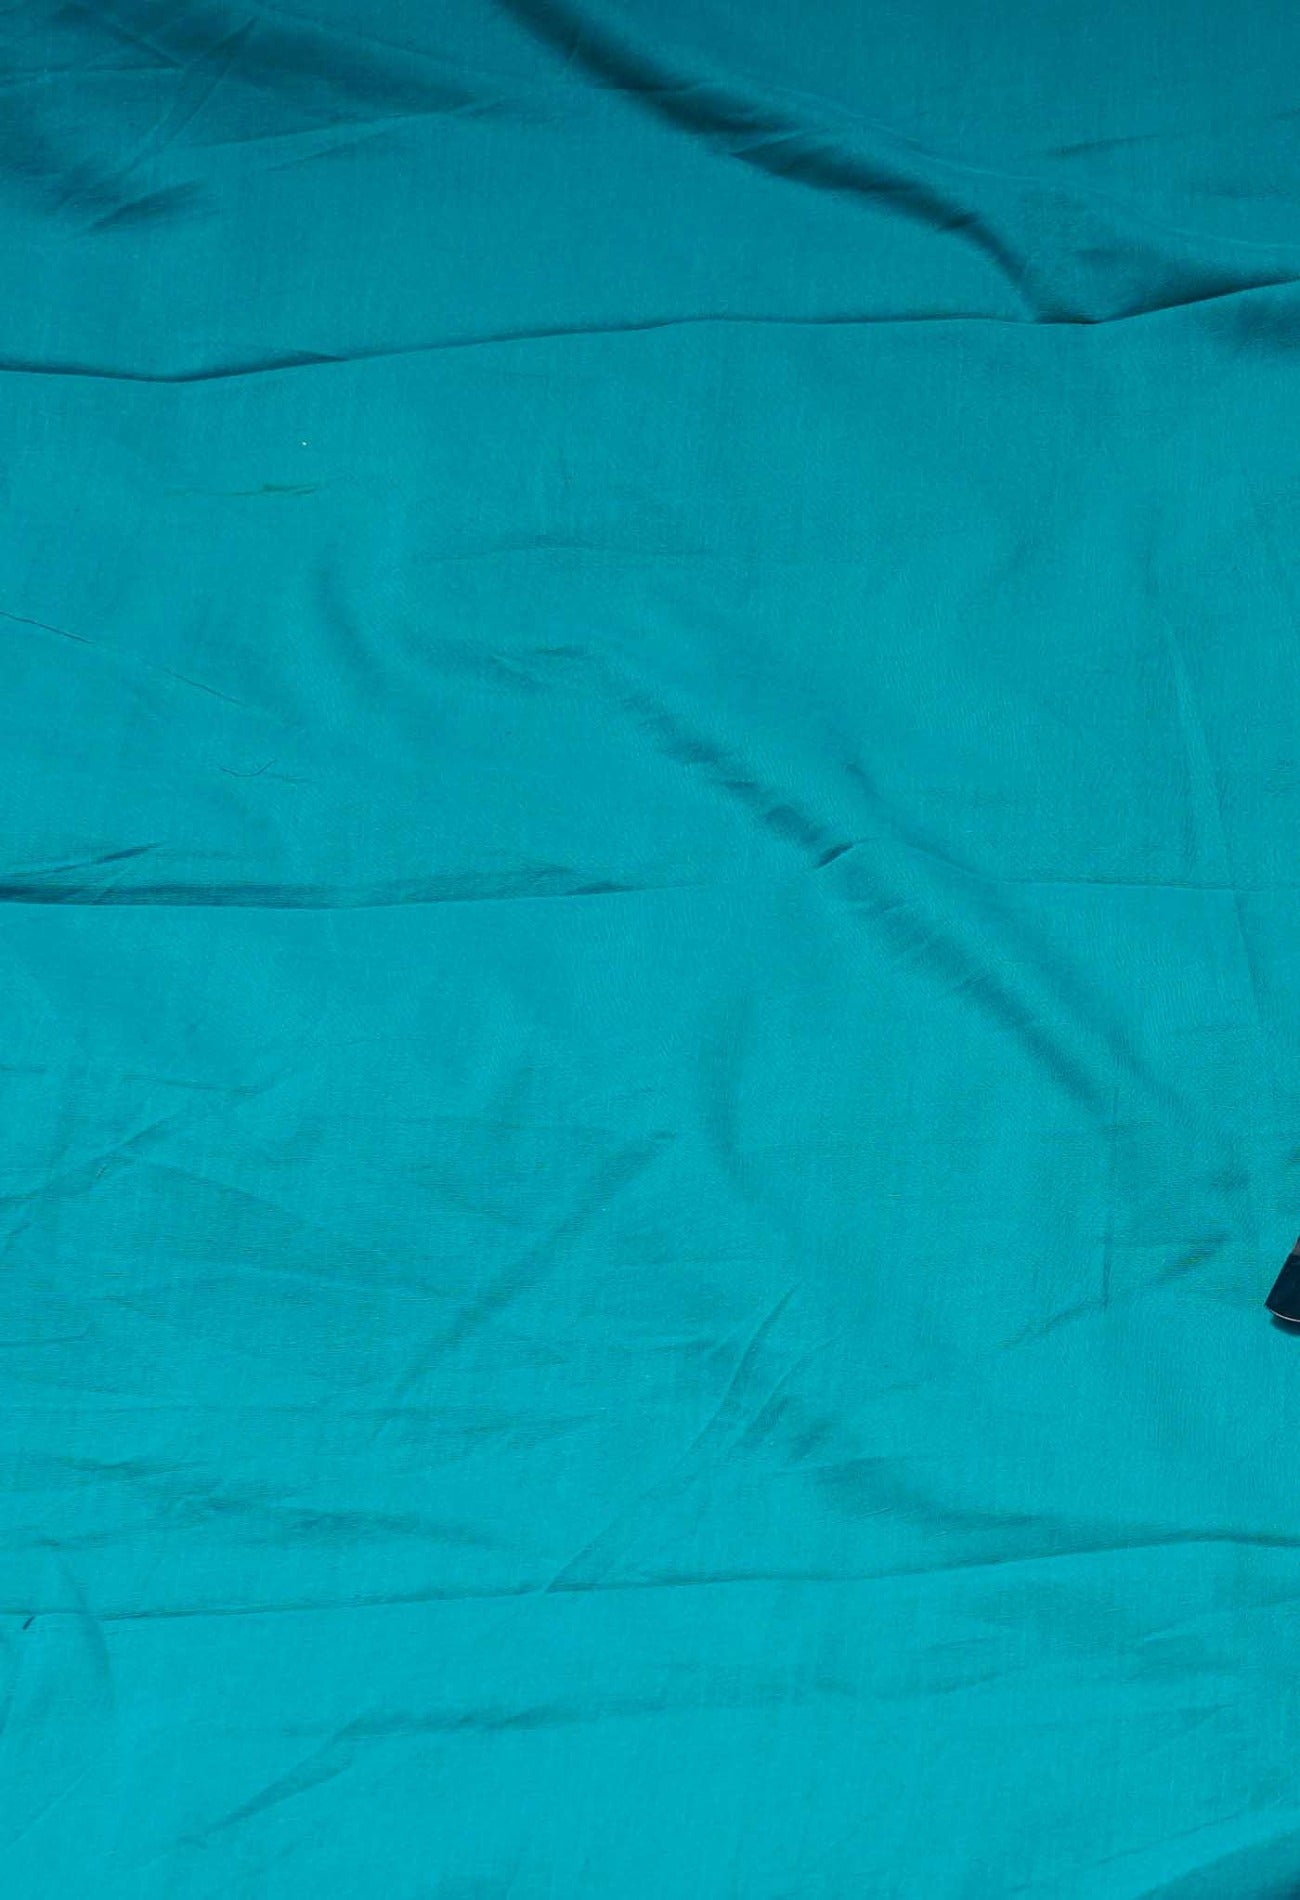 Online Shopping for Blue Pure Bagh venkatagiri Superfine Cotton Saree with Bagh from Andhra Pradesh at Unnatisilks.com India
